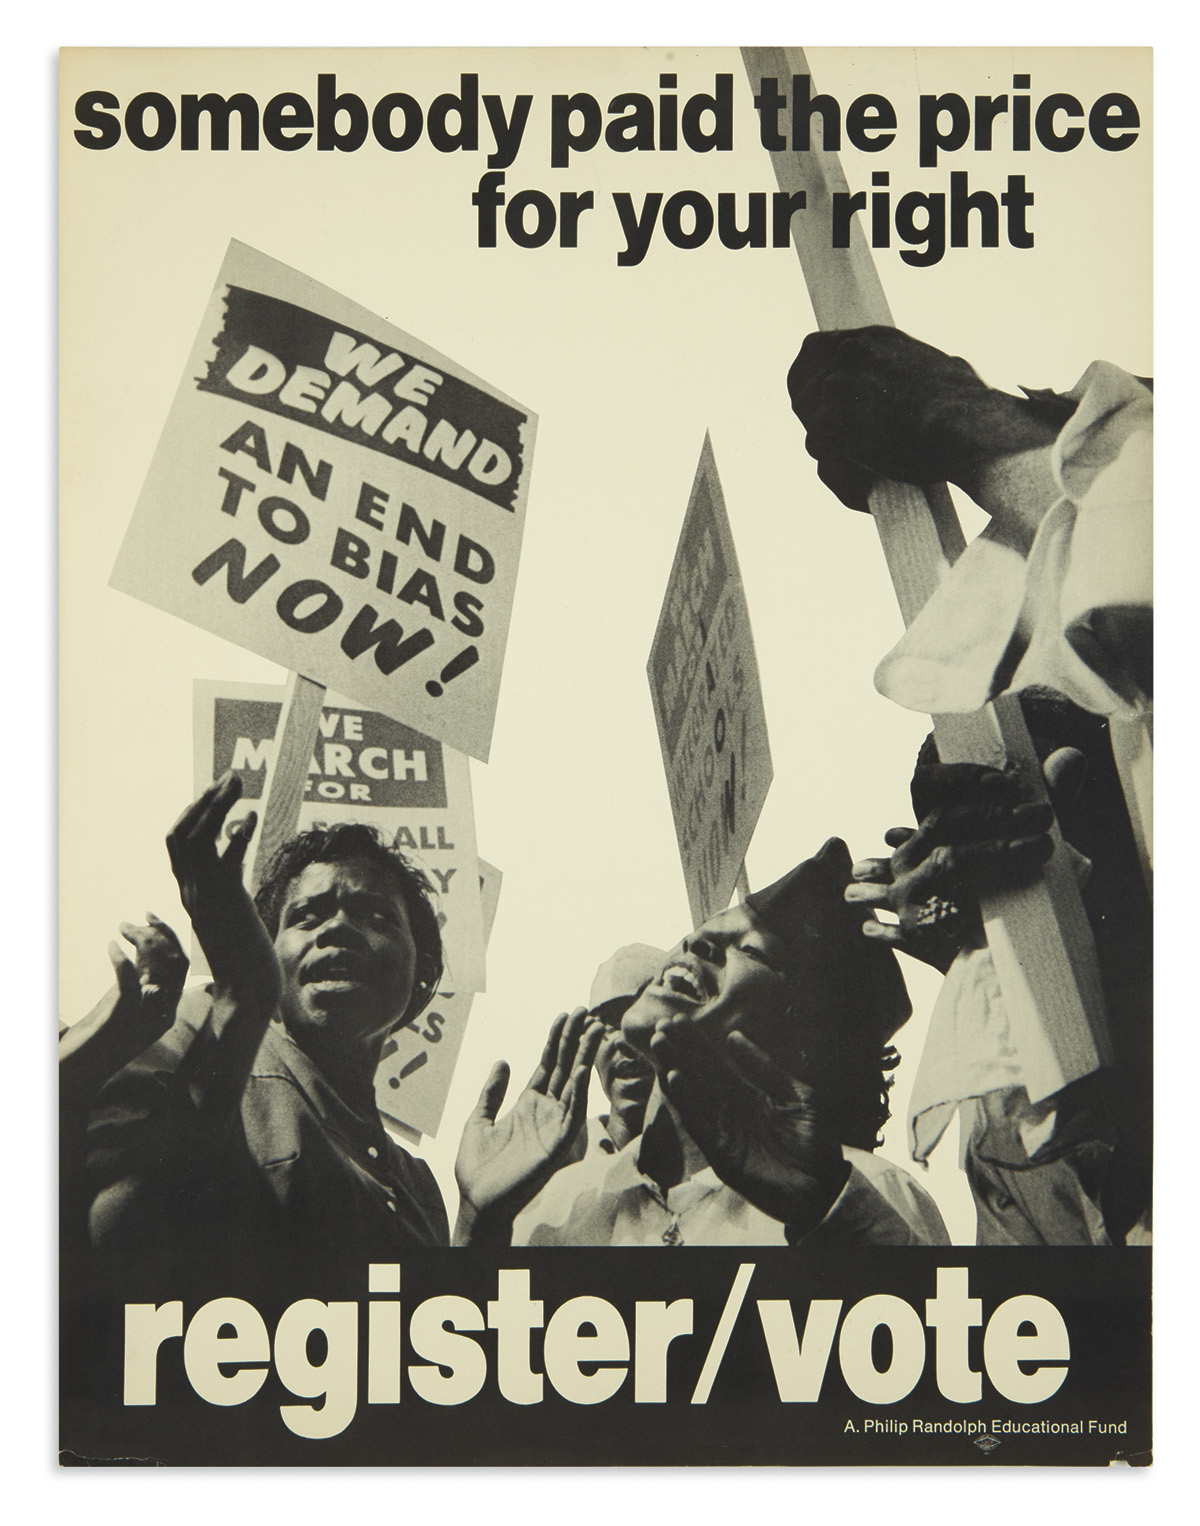 (CIVIL RIGHTS.) Pair of voting rights posters from A. Philip Randolph Educational Fund.